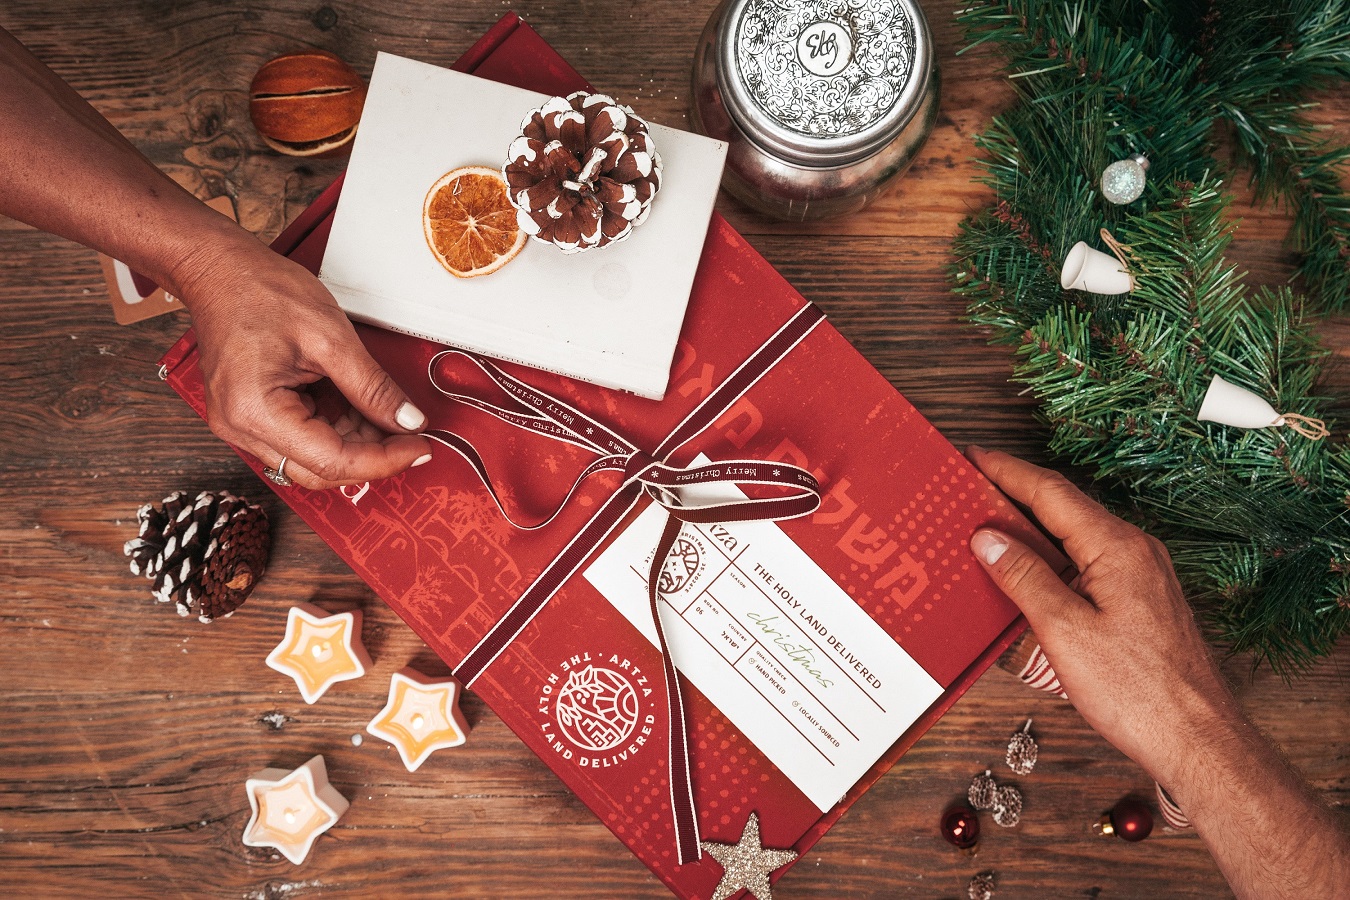 Two hands holding the Artza christmas subscription box